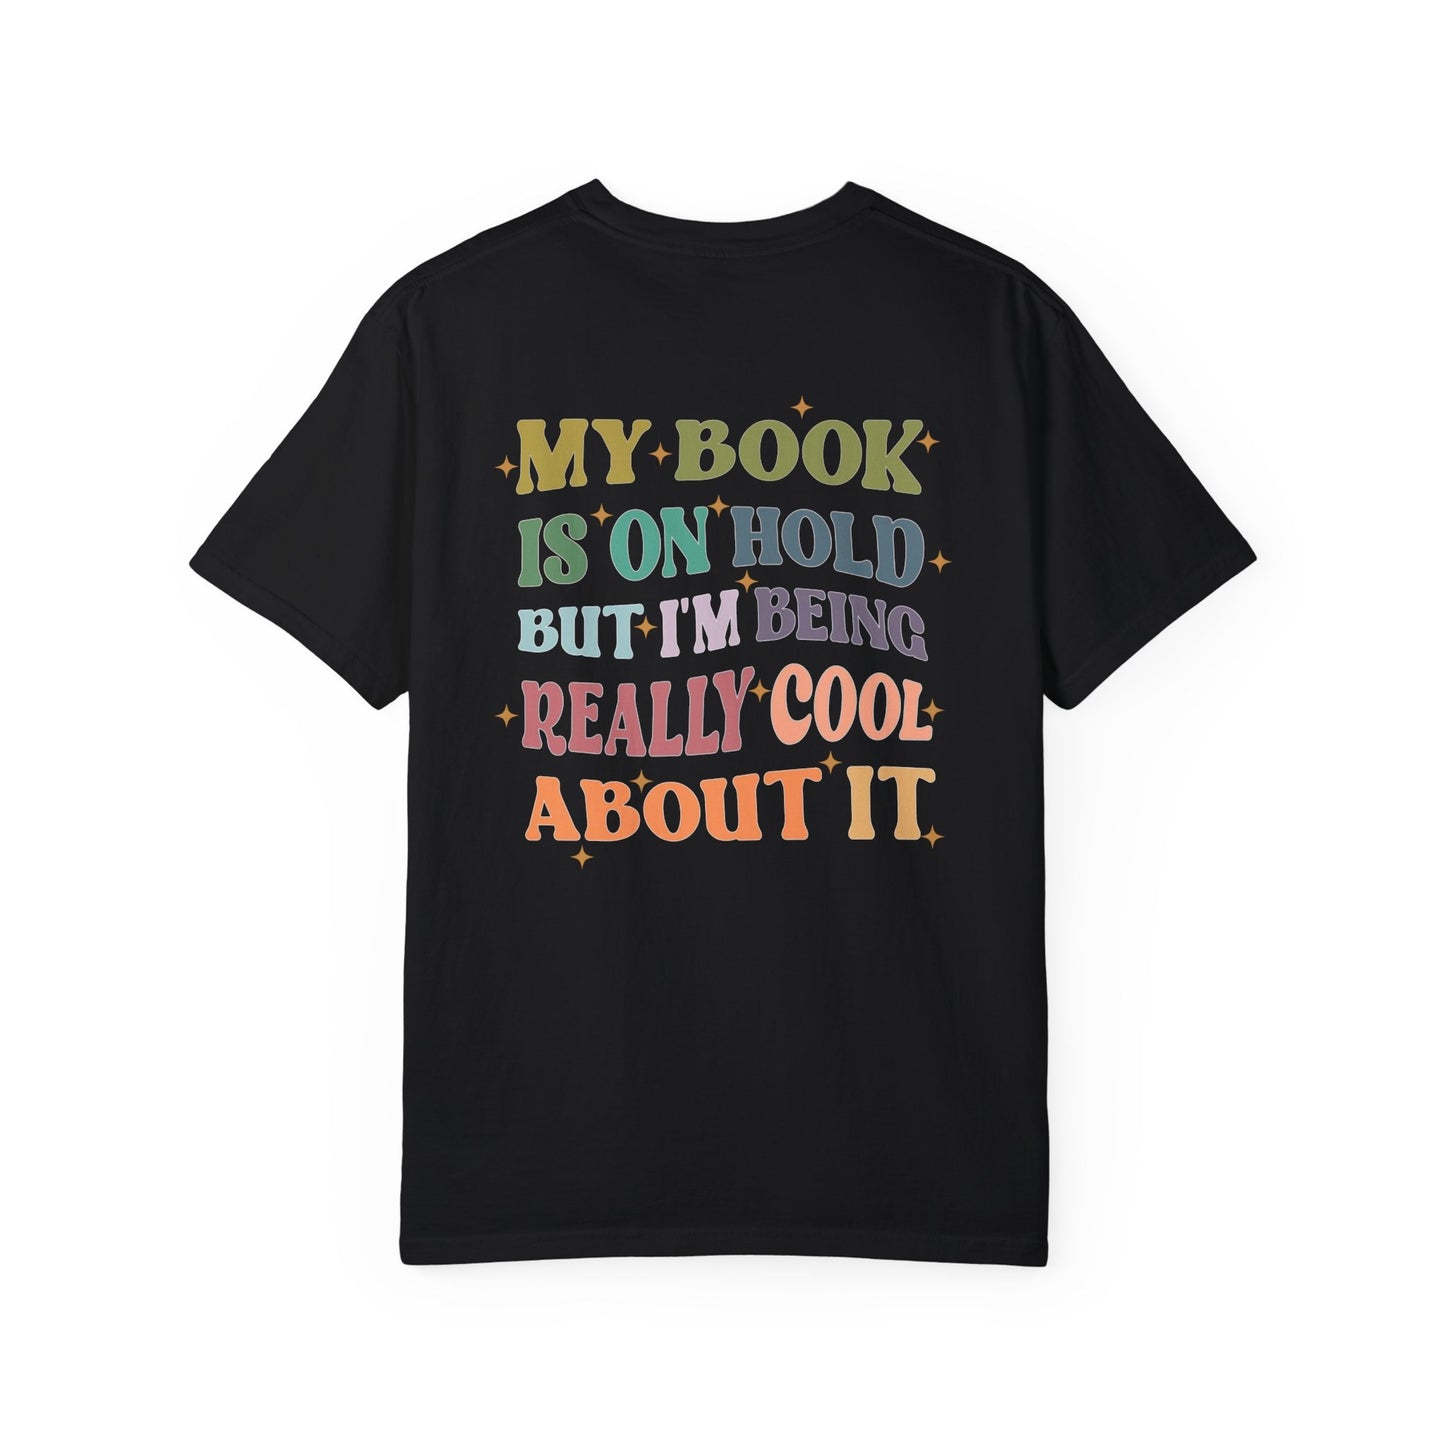 Support Your Library Shirt Book Shirt Bookish Things Booktok Merch Book Club Emotional Reading Tee Born To Read Dark Romance Spicy Book Tee